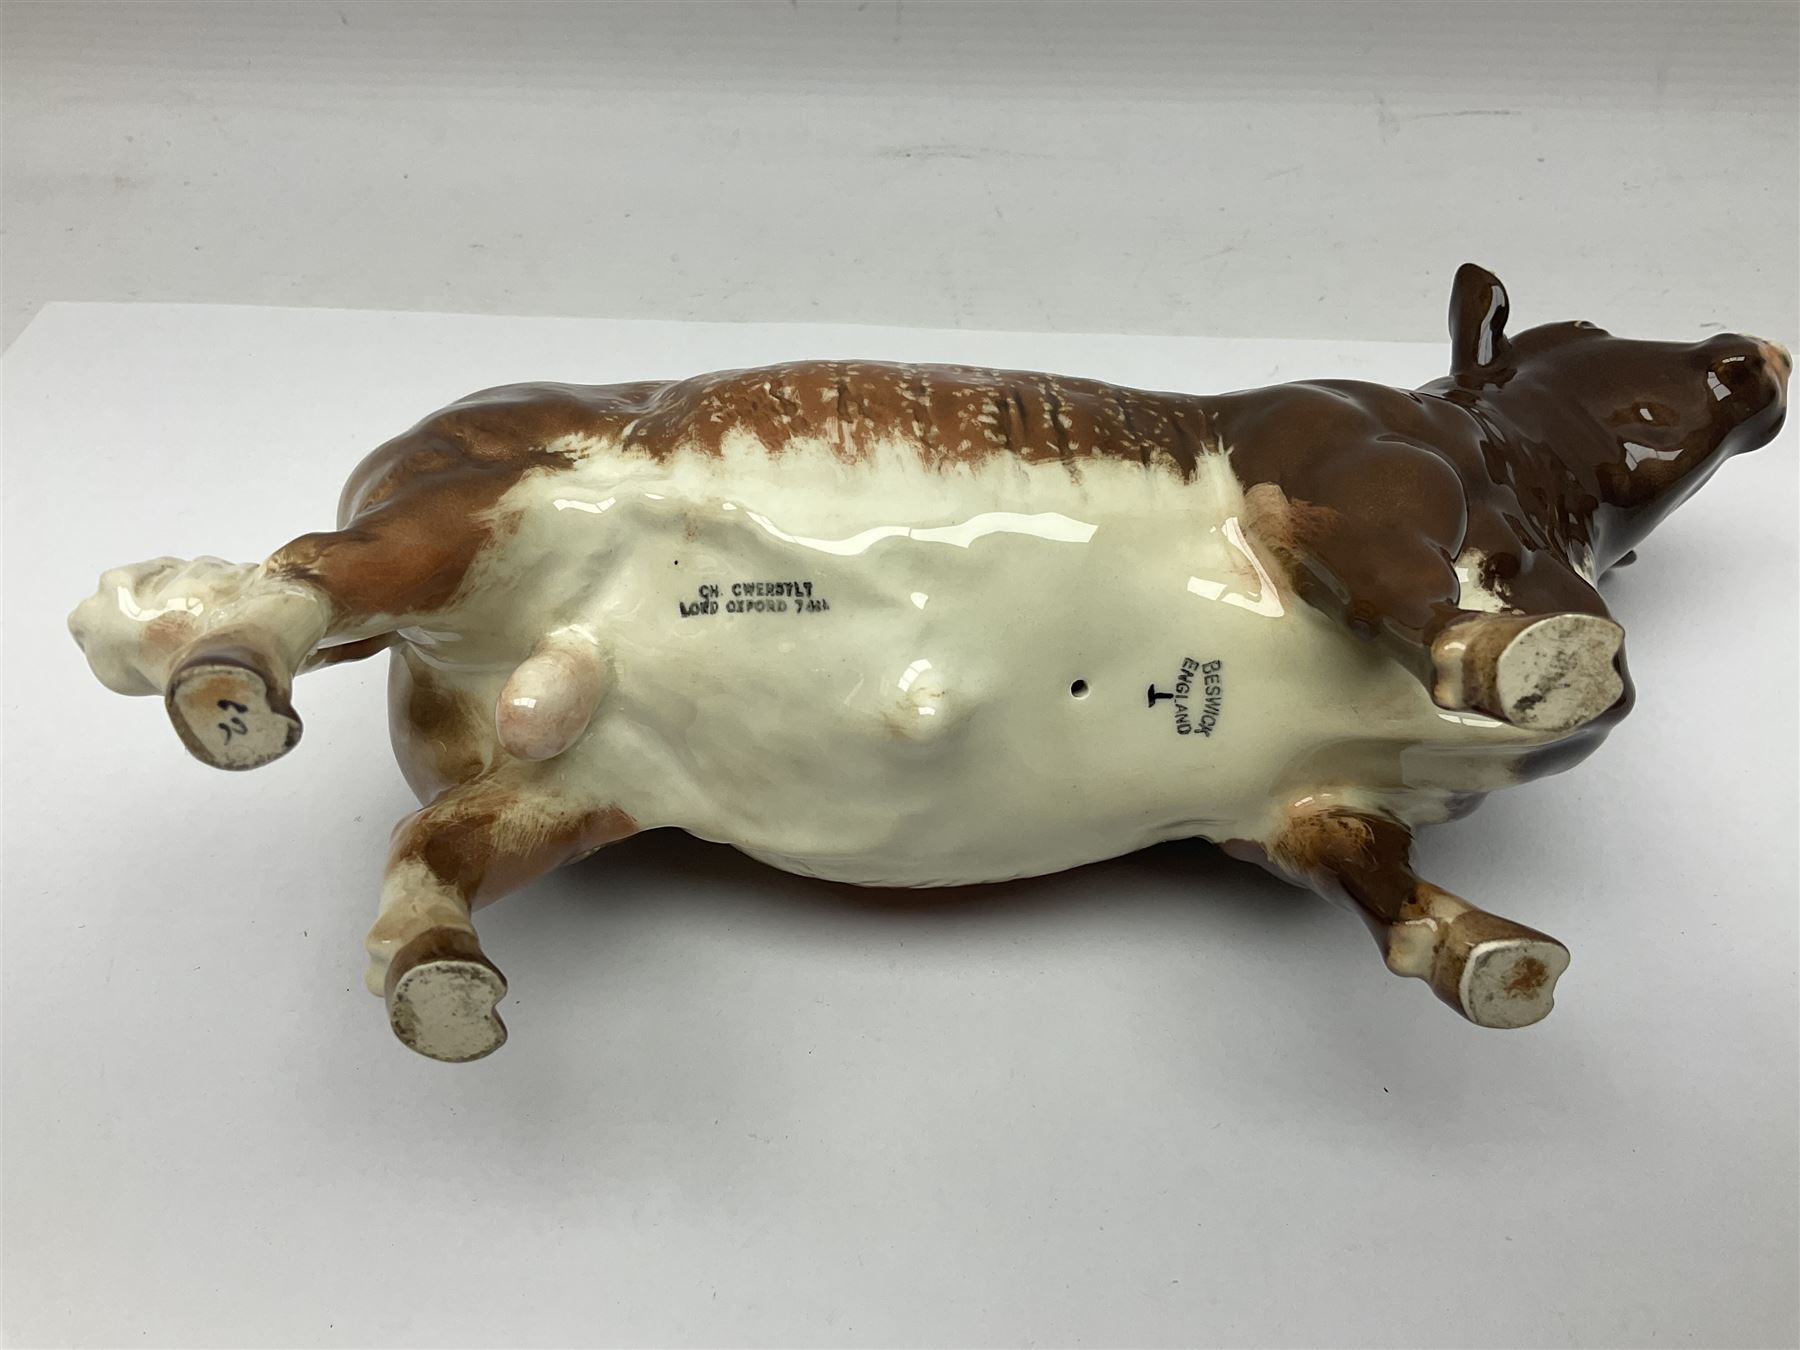 Beswick Dairy Shorthorn Bull Ch. 'Gwersylt Lord Oxford 74th' - Image 5 of 7